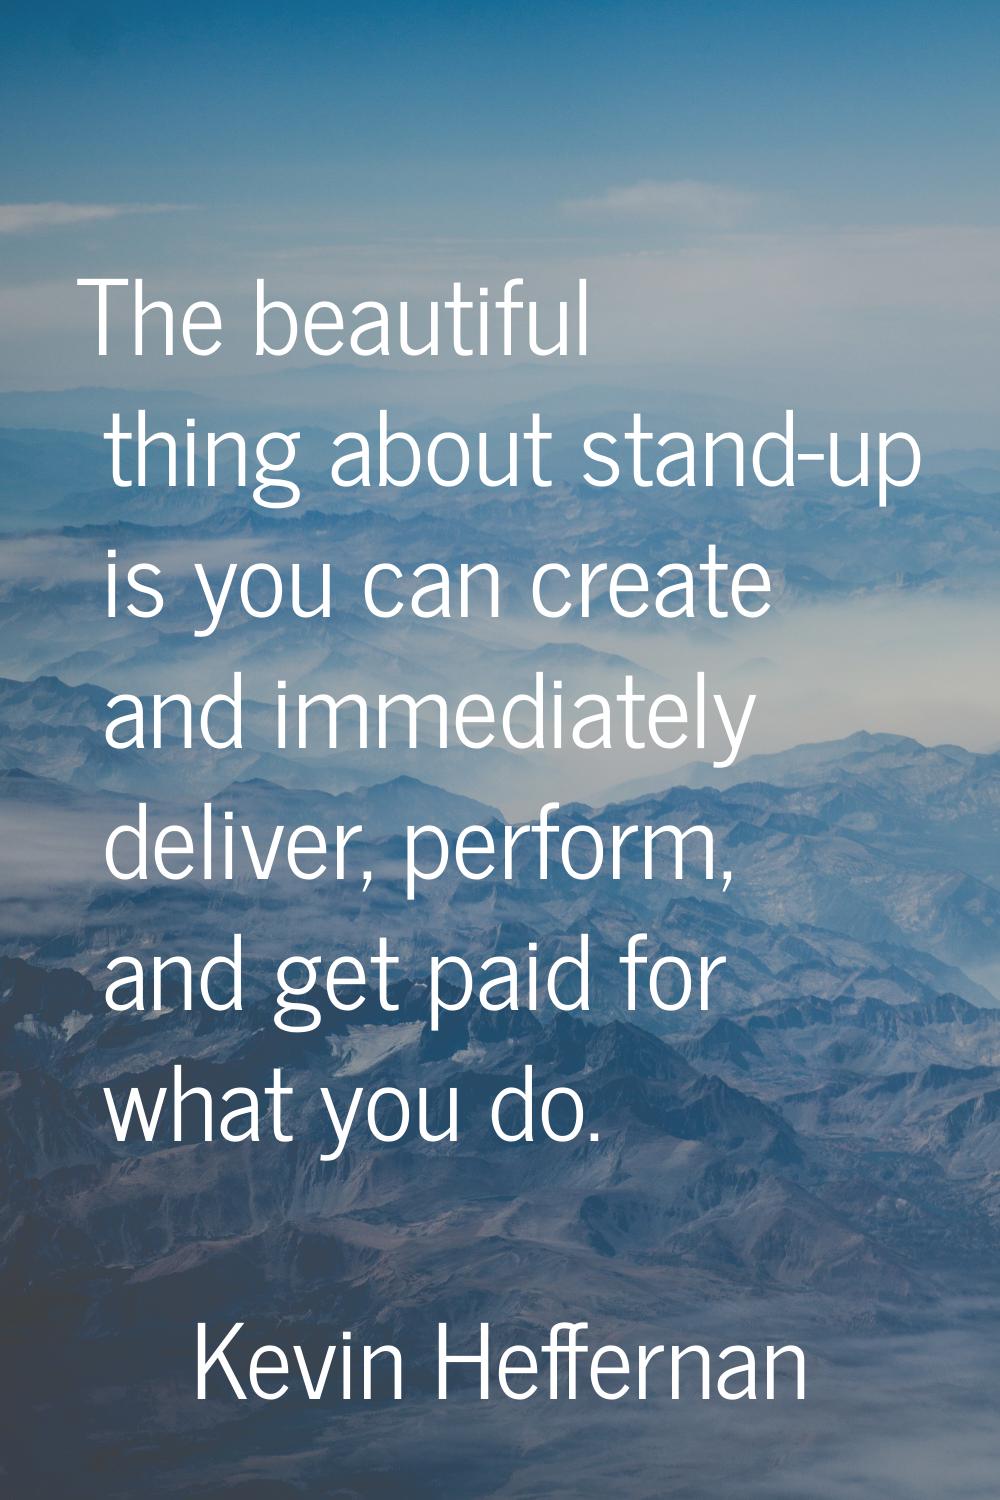 The beautiful thing about stand-up is you can create and immediately deliver, perform, and get paid